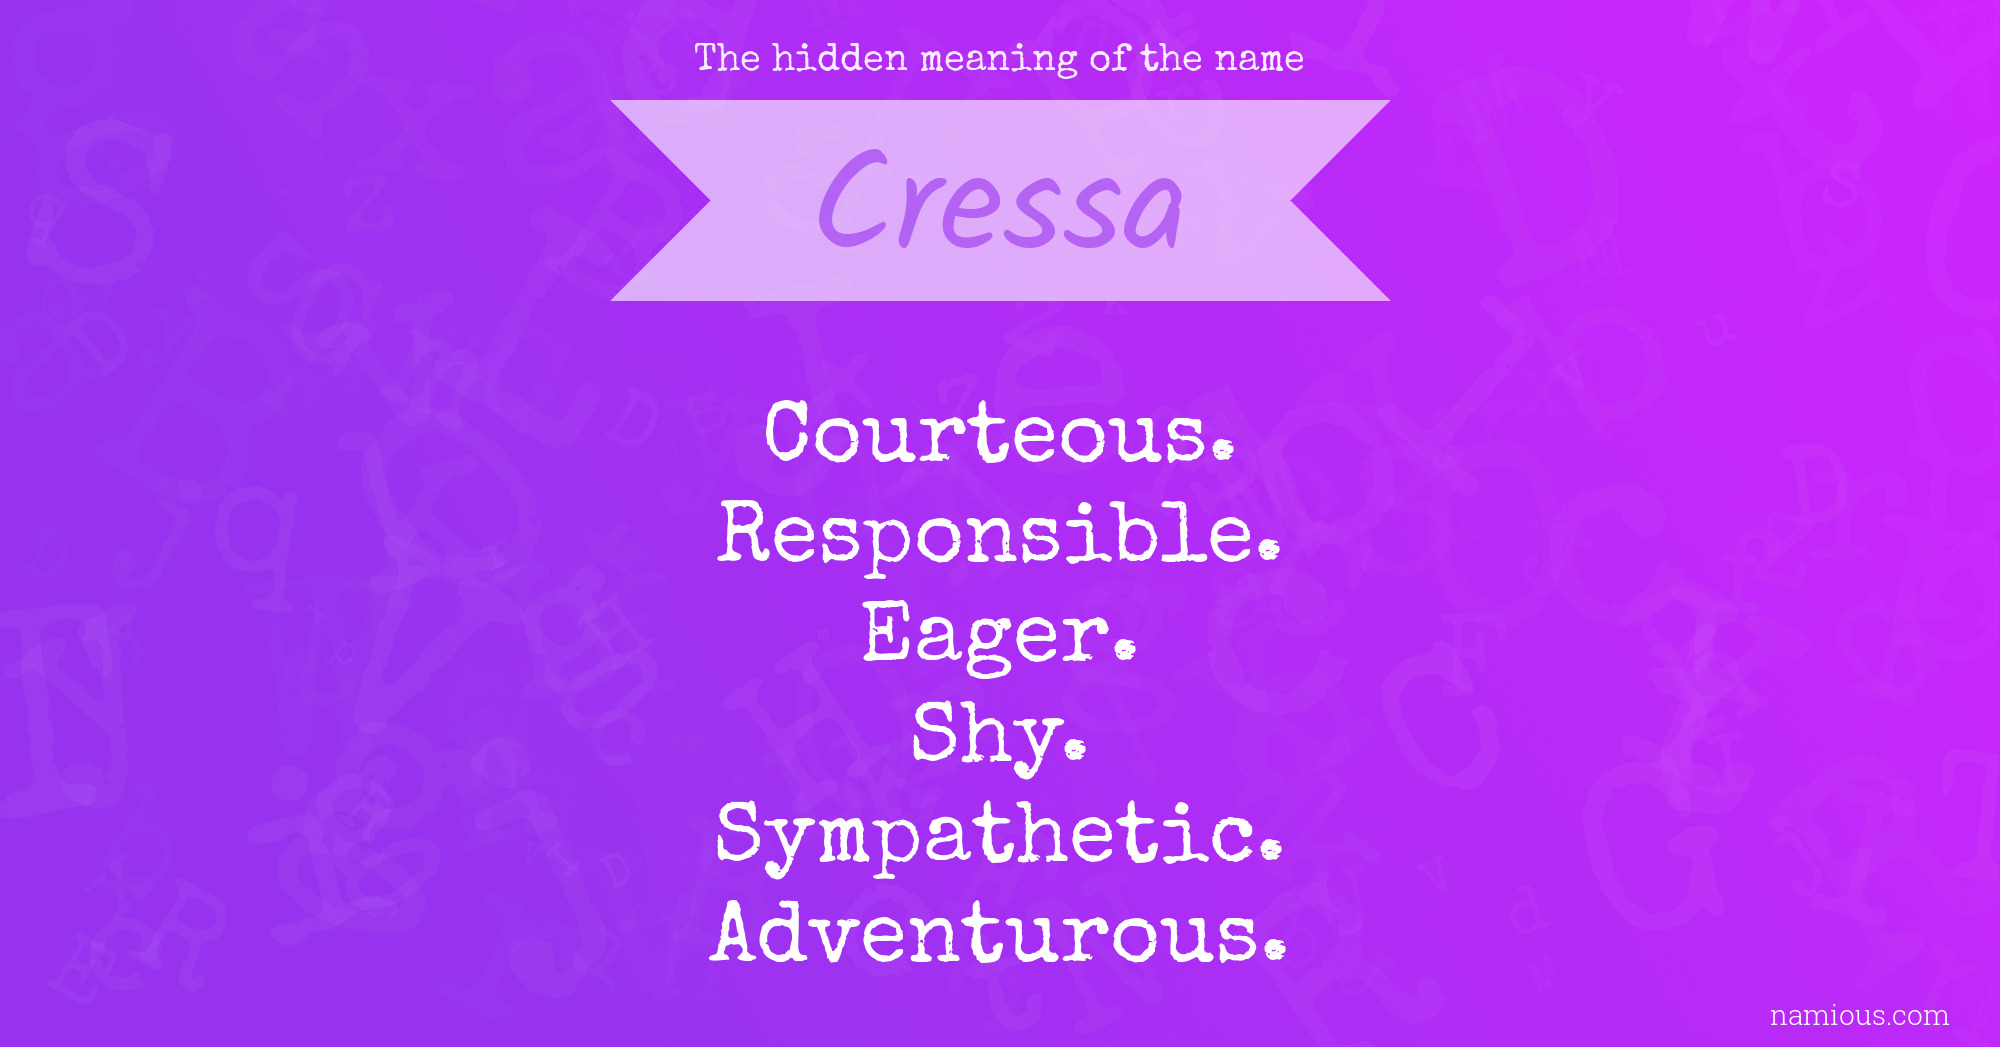 The hidden meaning of the name Cressa